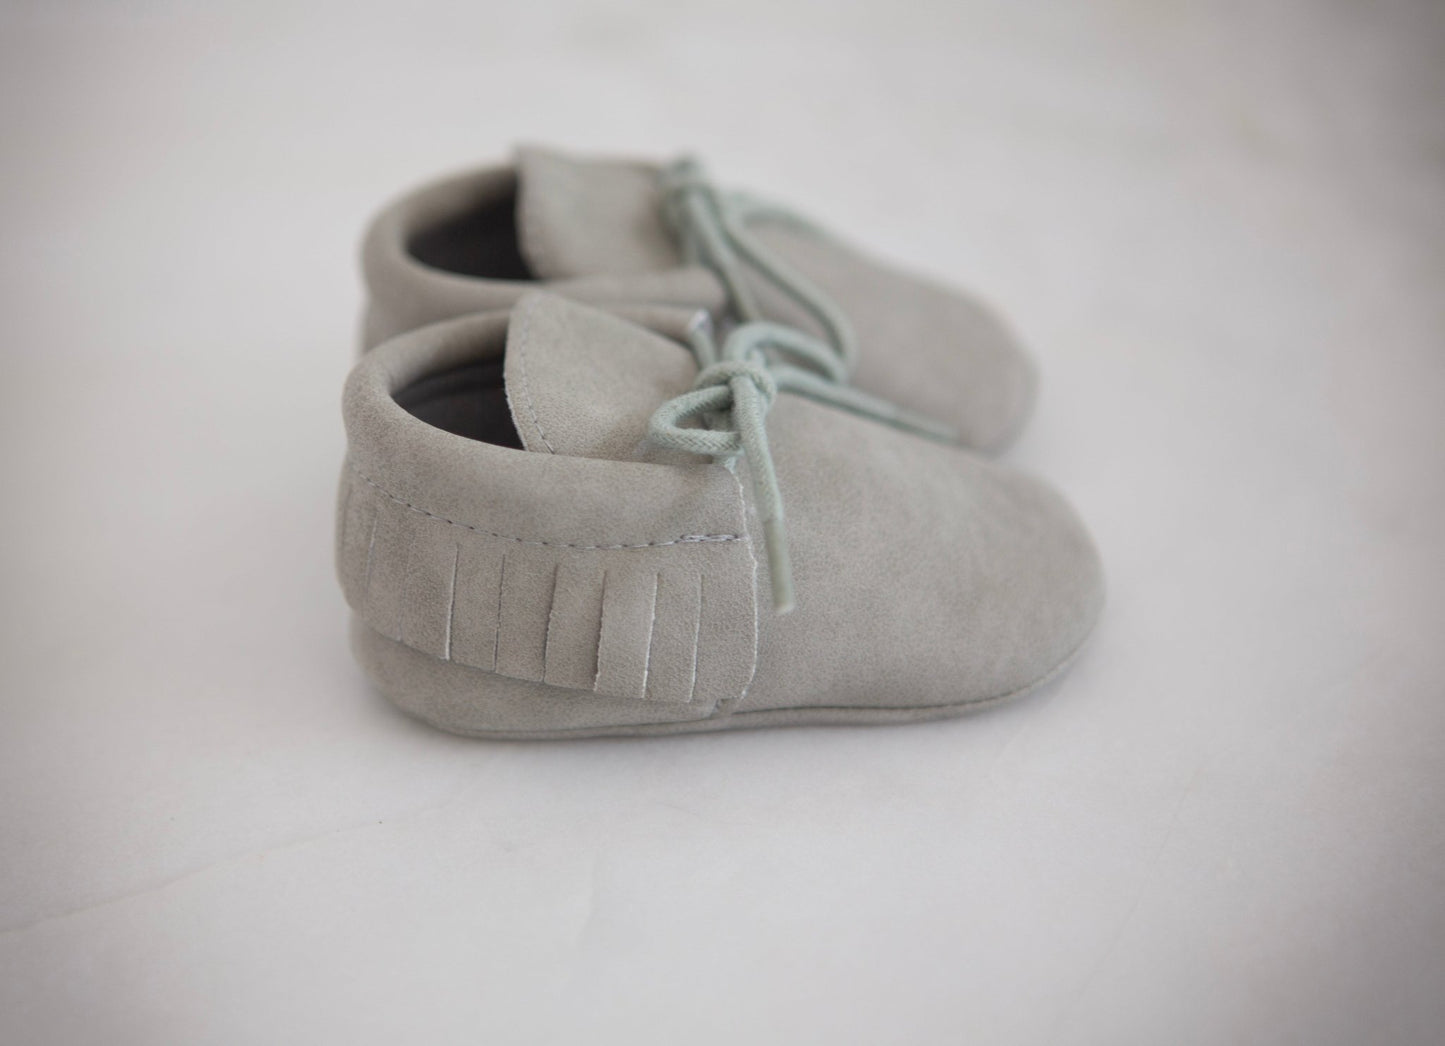 Load image into Gallery viewer, Baby Moccasins - Cheerful Lane
